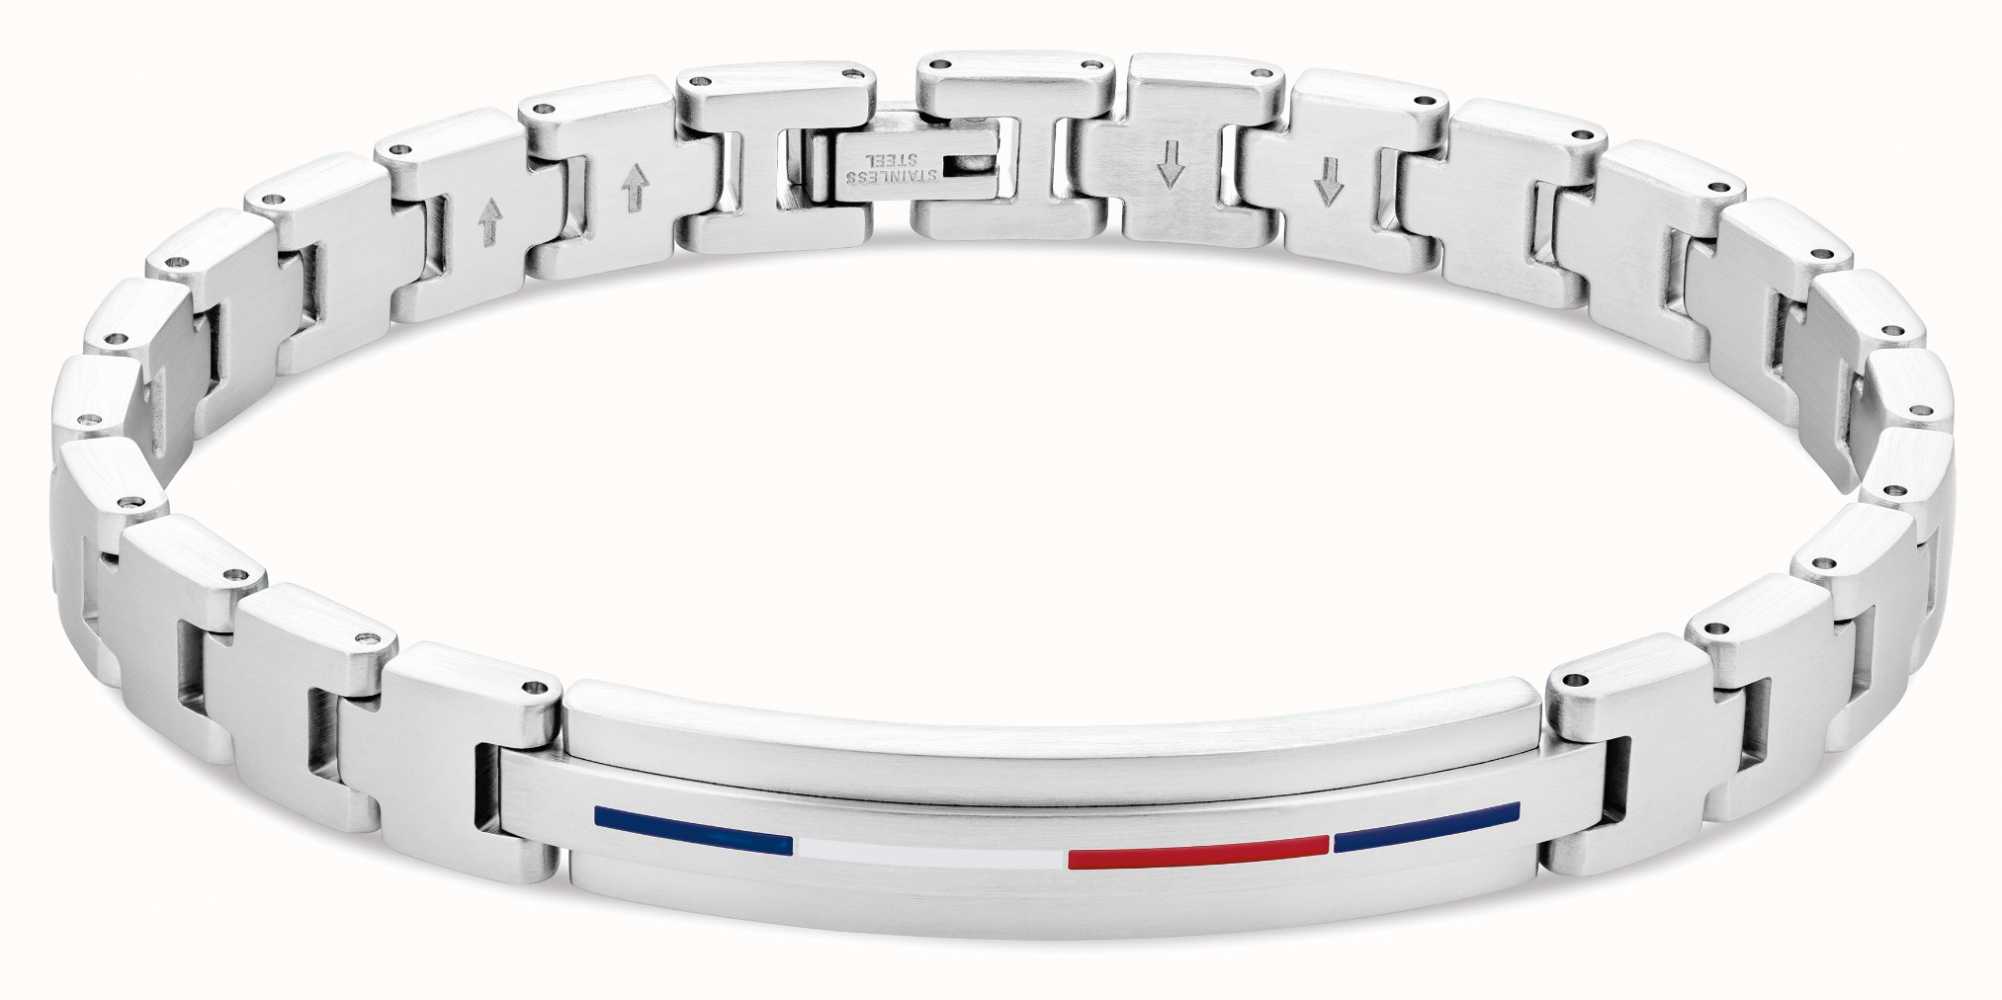 Tommy Hilfiger | Accessories | Tommy Hilfiger Mens Jewelry Stainless Steel  Chunk Chain Bracelet | Poshmark